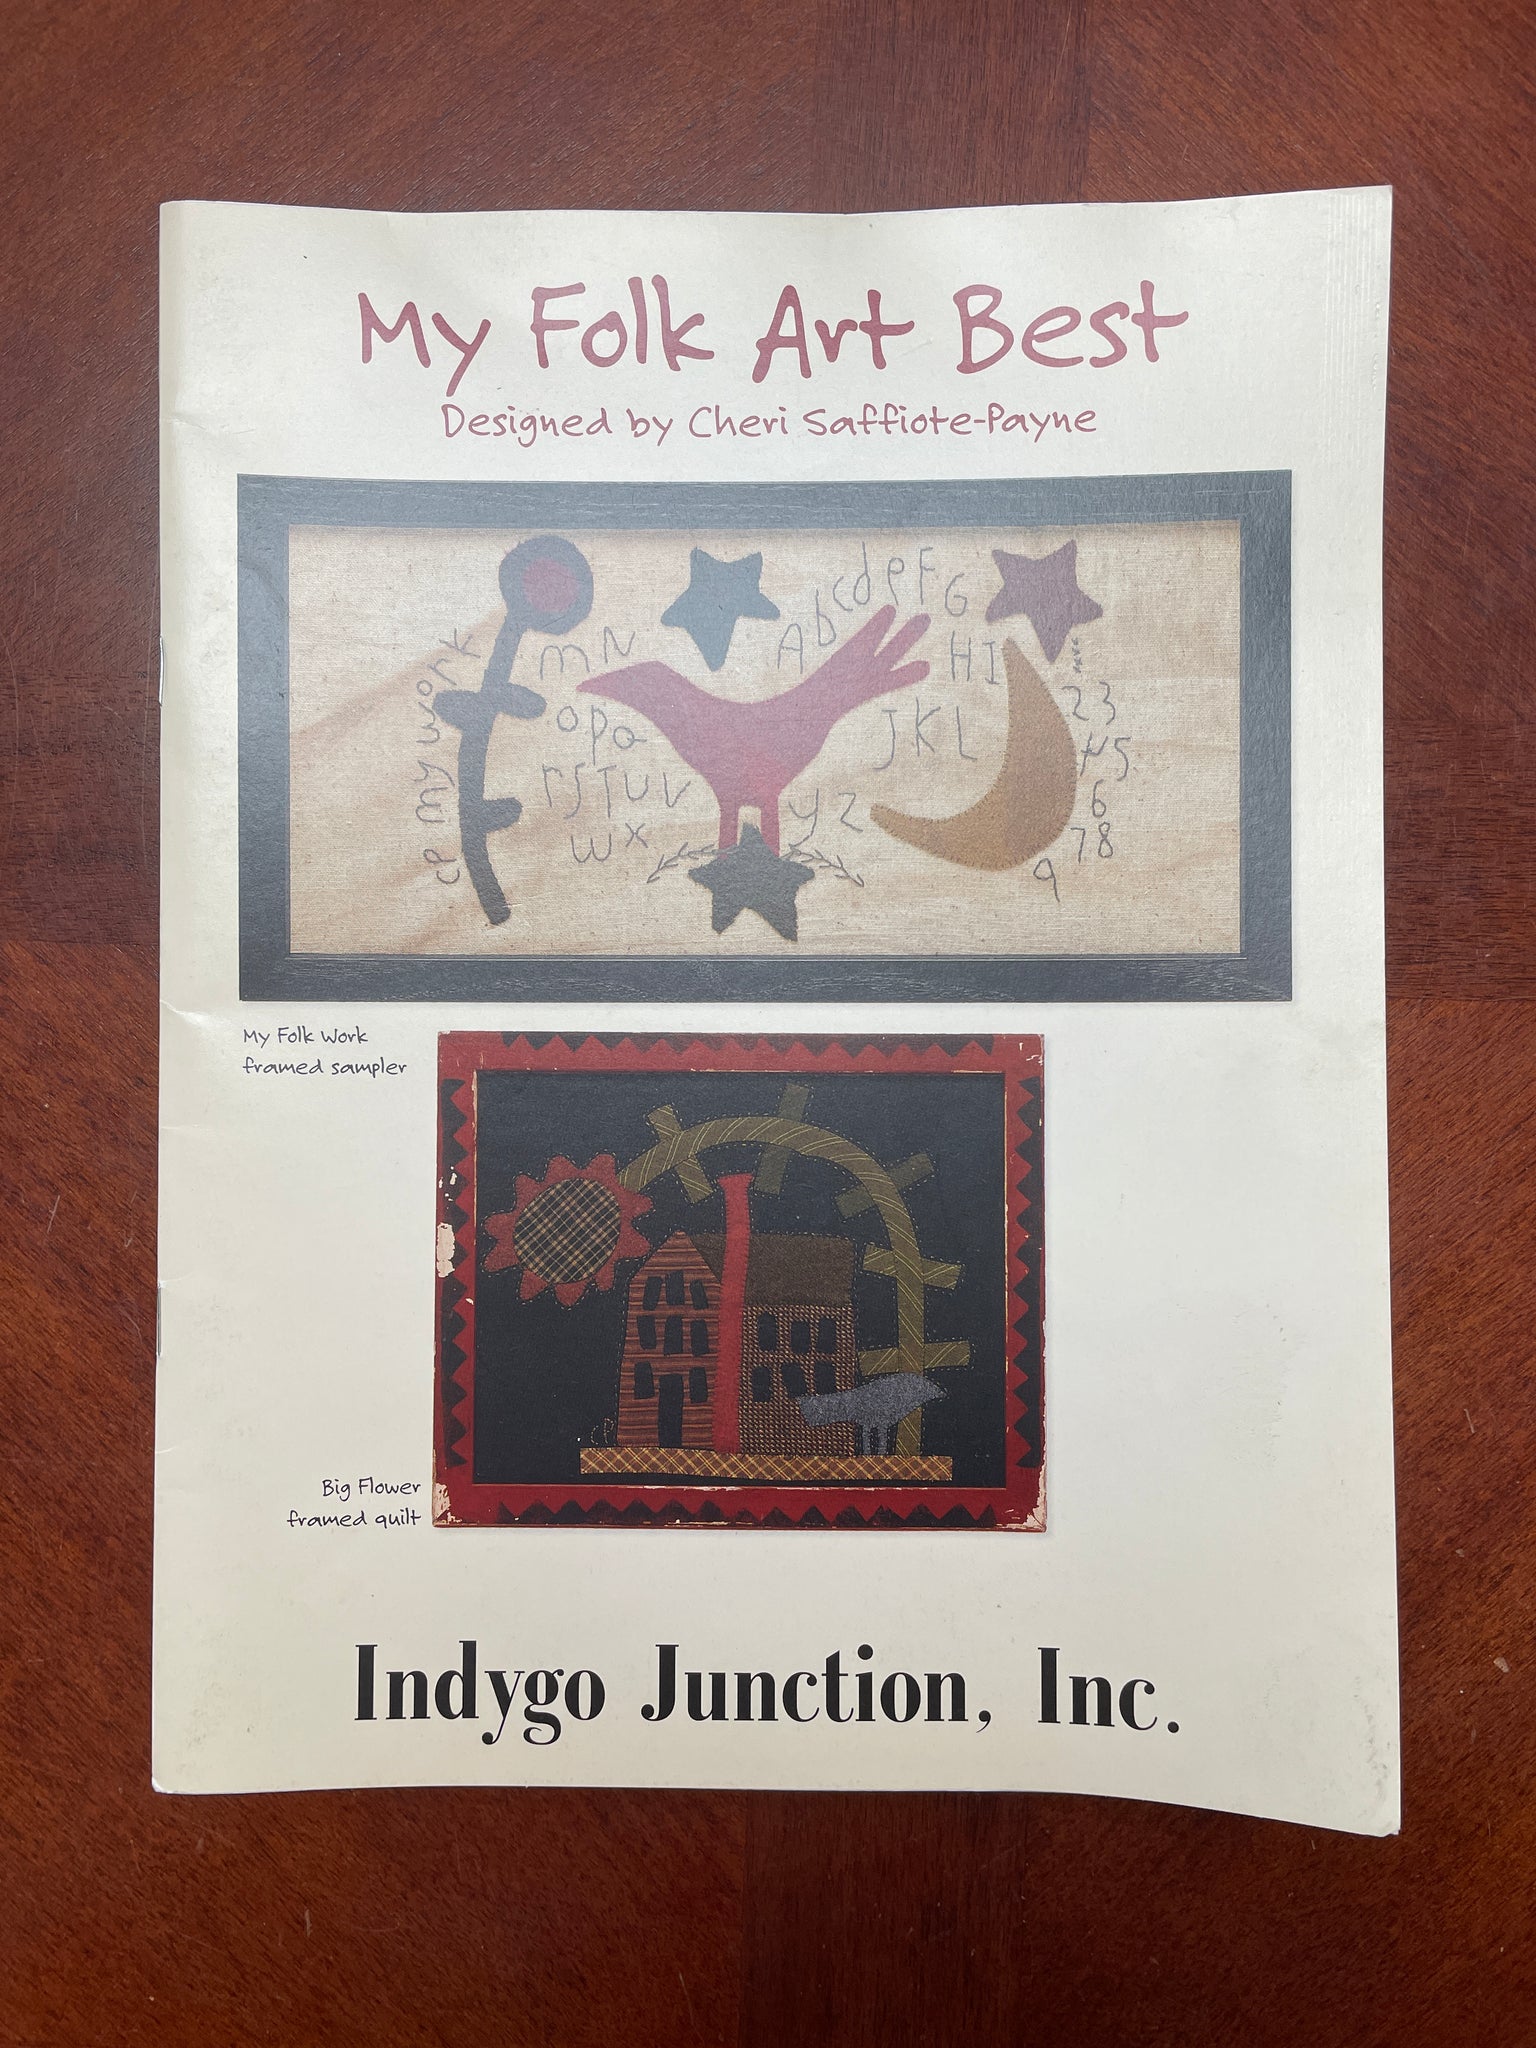 2002 Applique and Quilting Book - "My Folk Art Best"